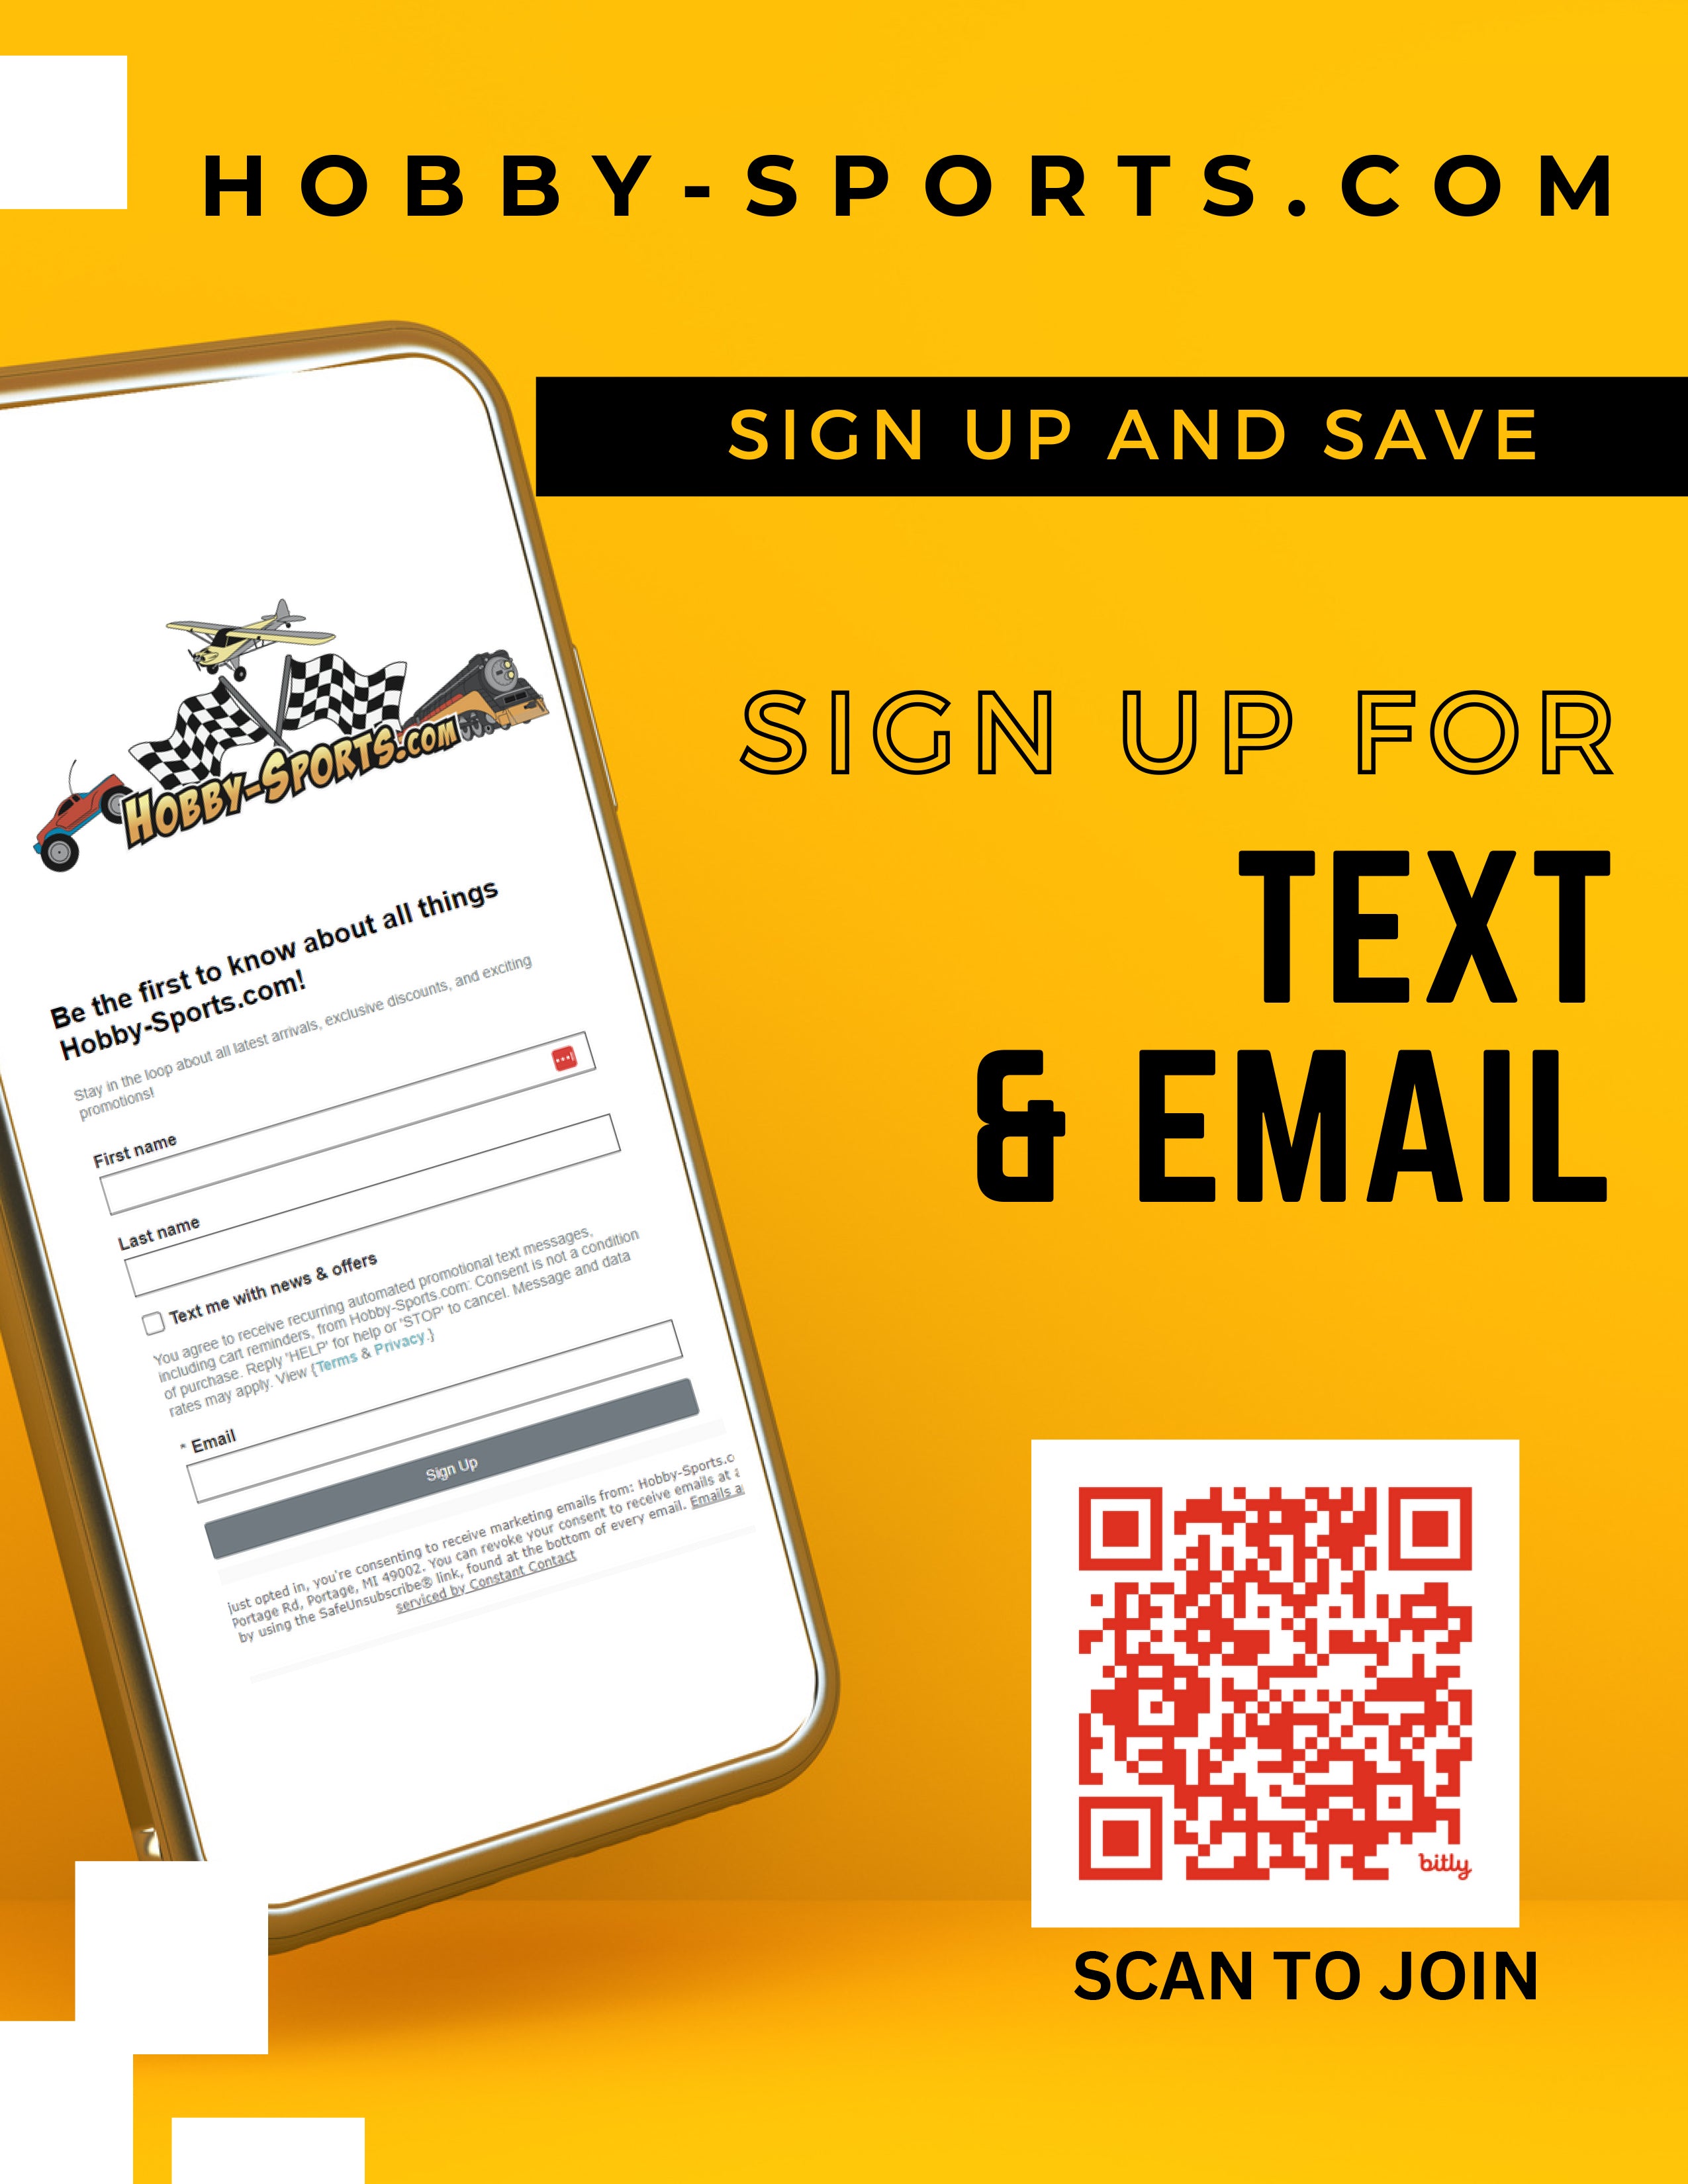 SIGN UP FOR TEXT & EMAIL